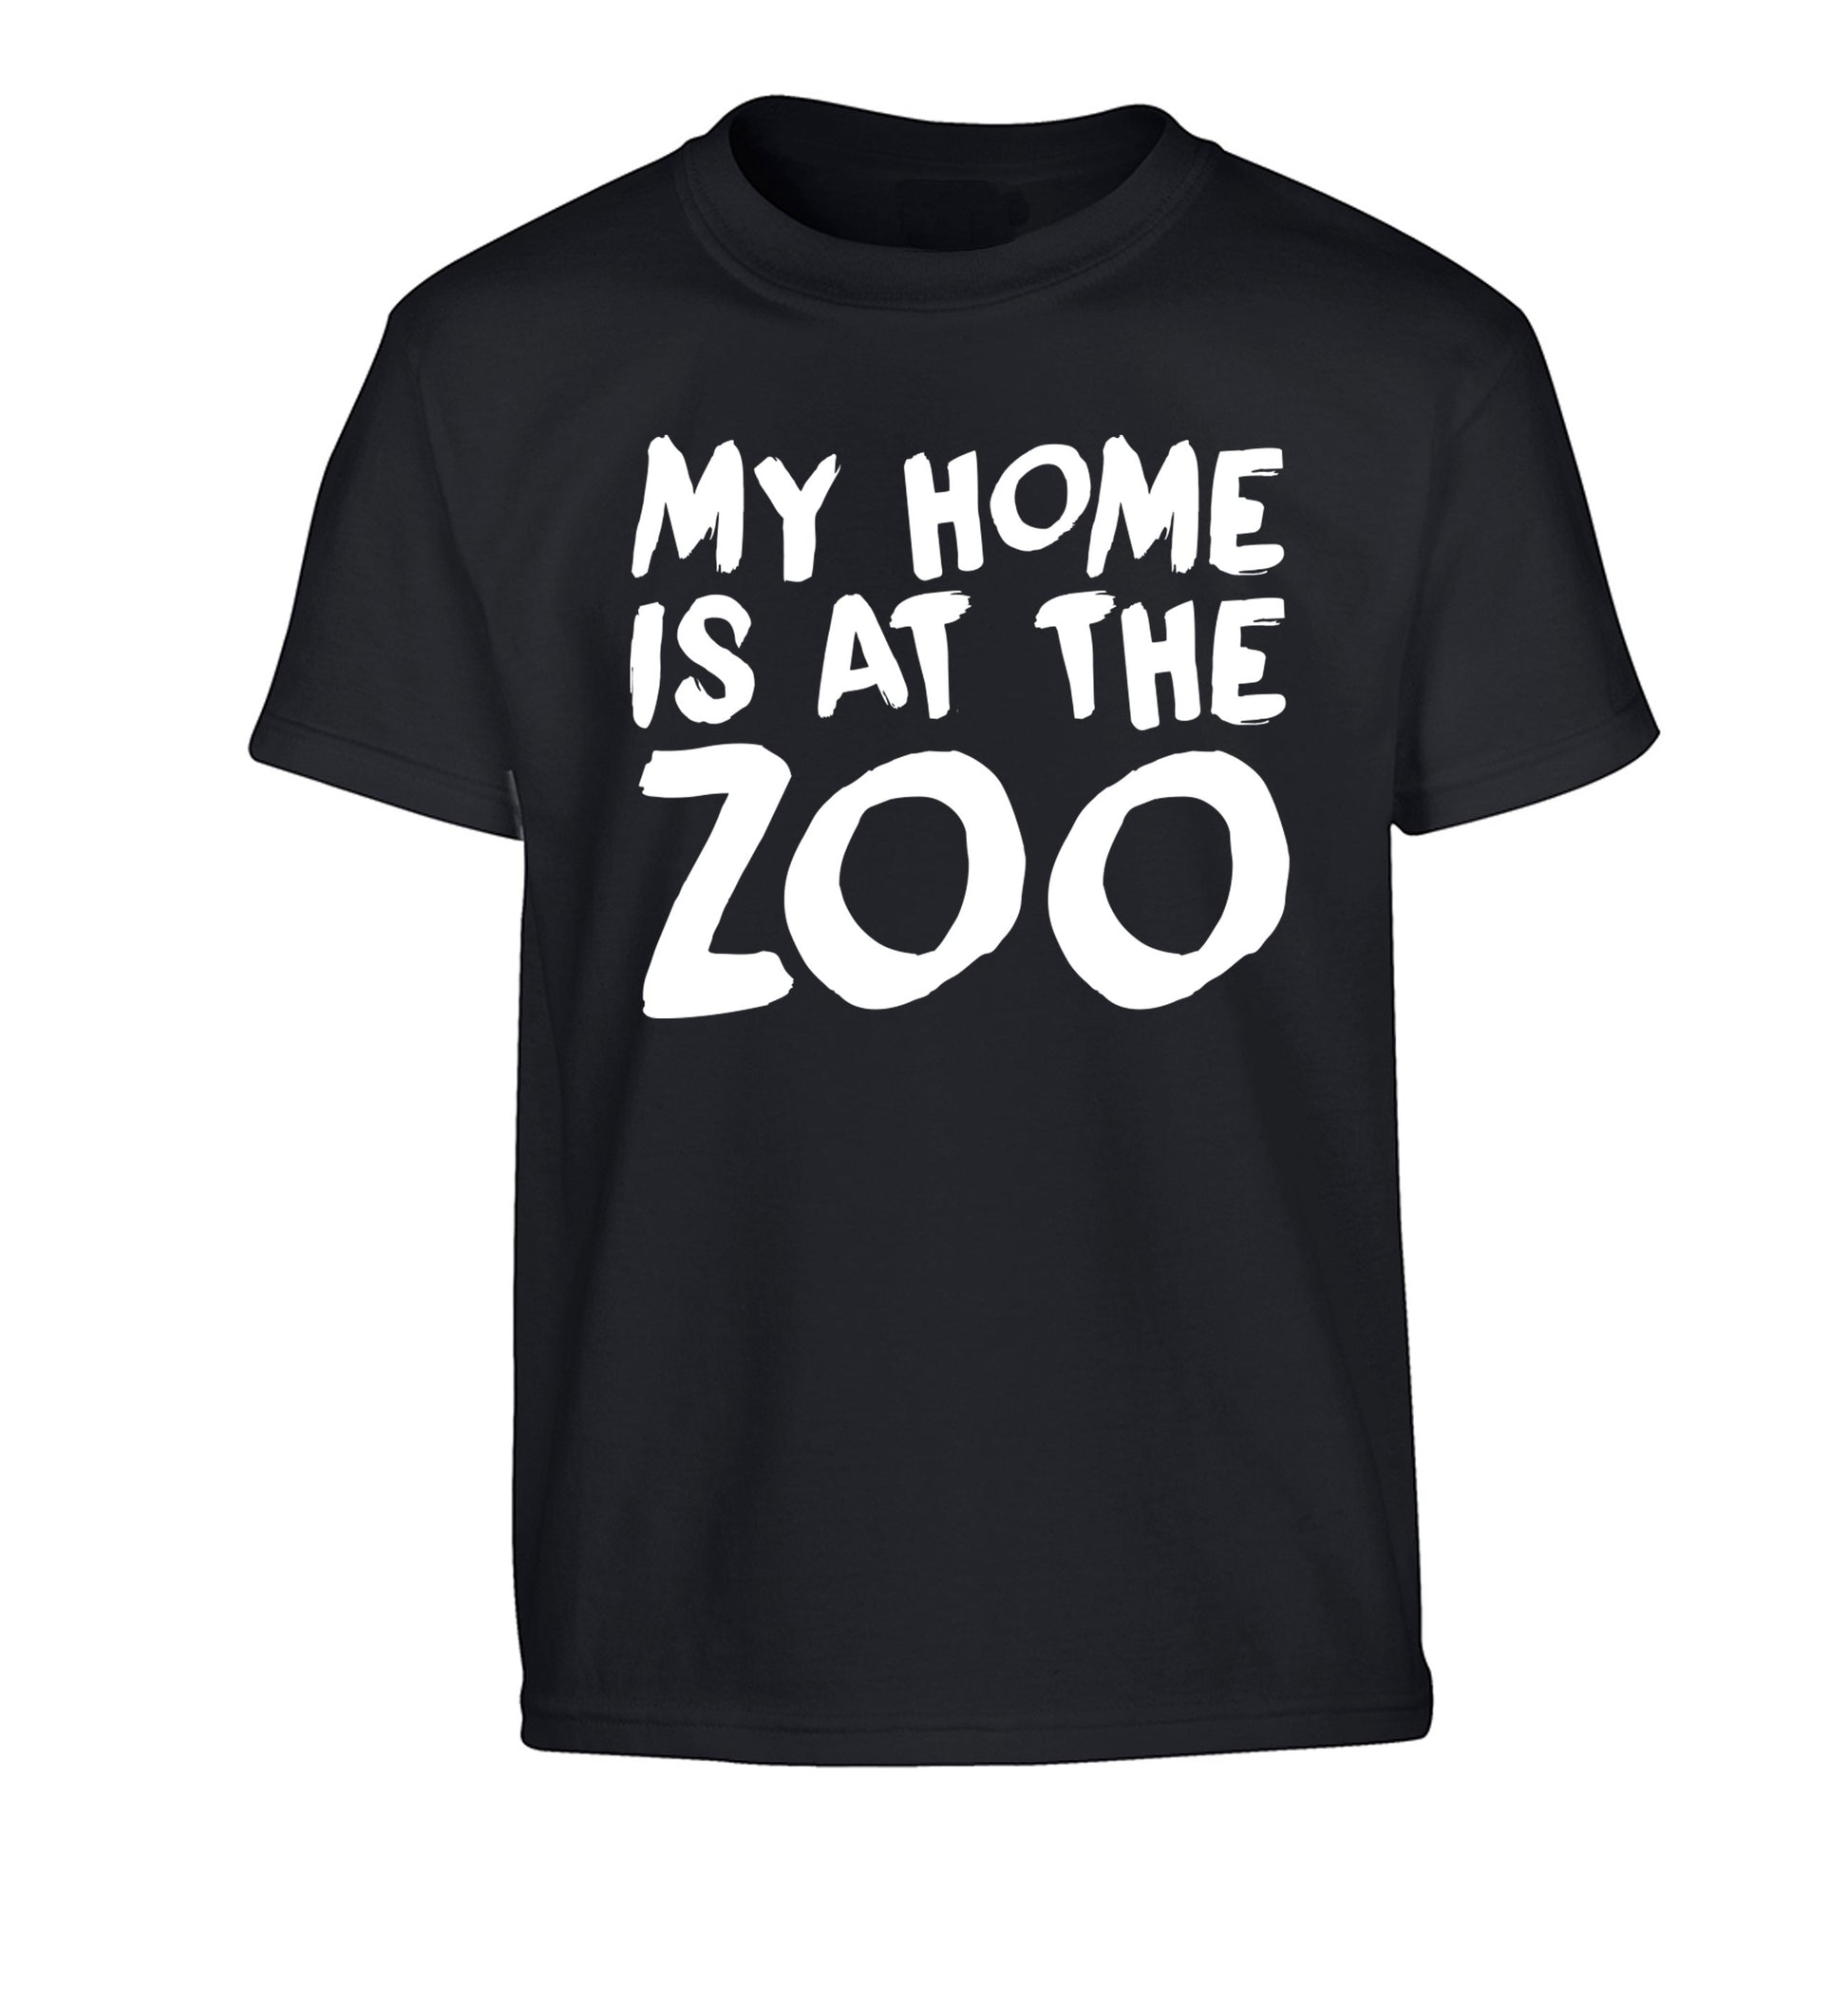 My home is at the zoo Children's black Tshirt 12-14 Years